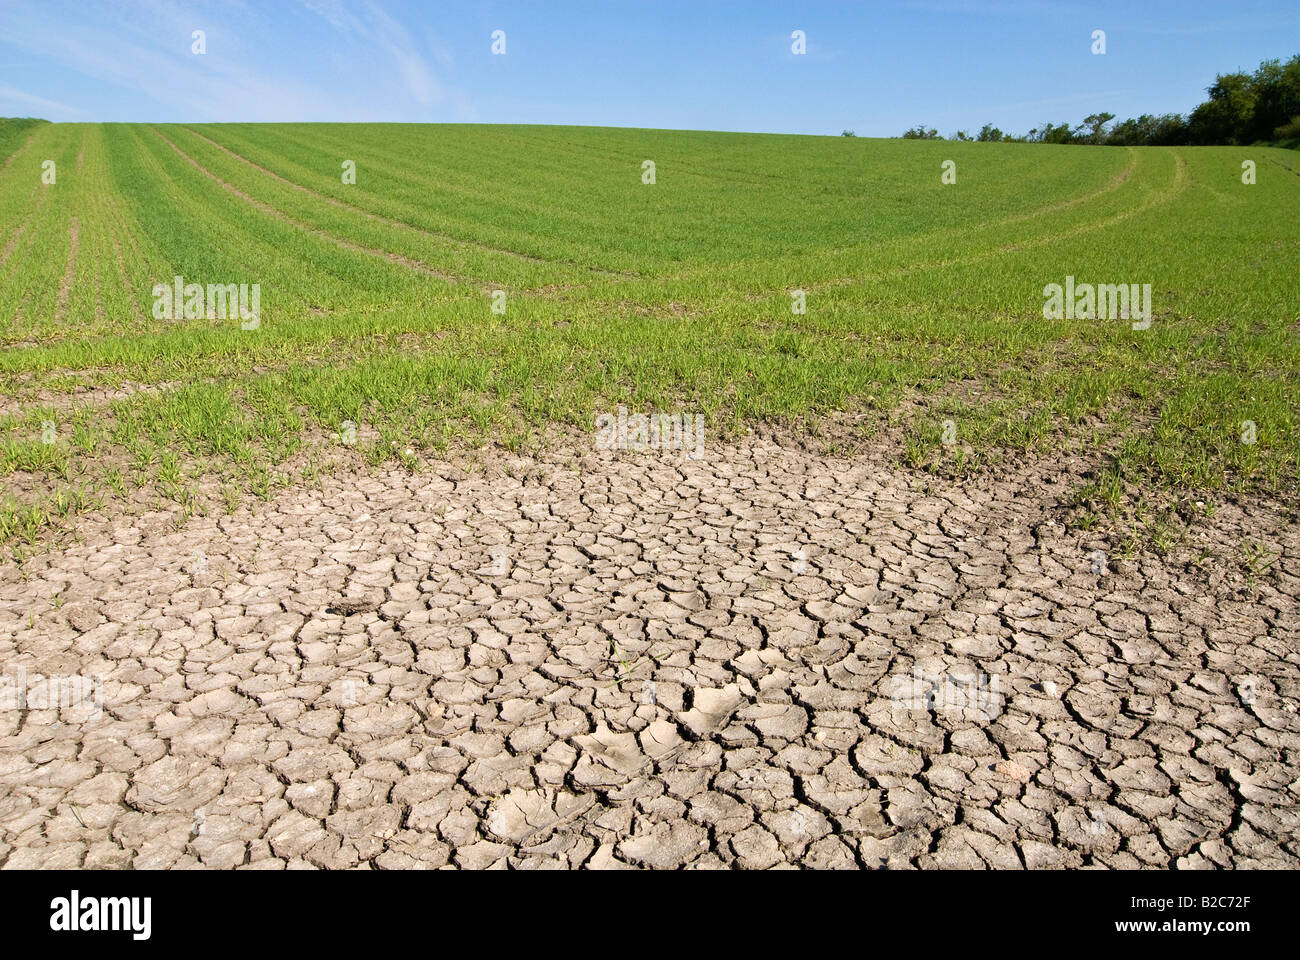 Cracked mud in the dry earth on the edge of a field Stock Photo